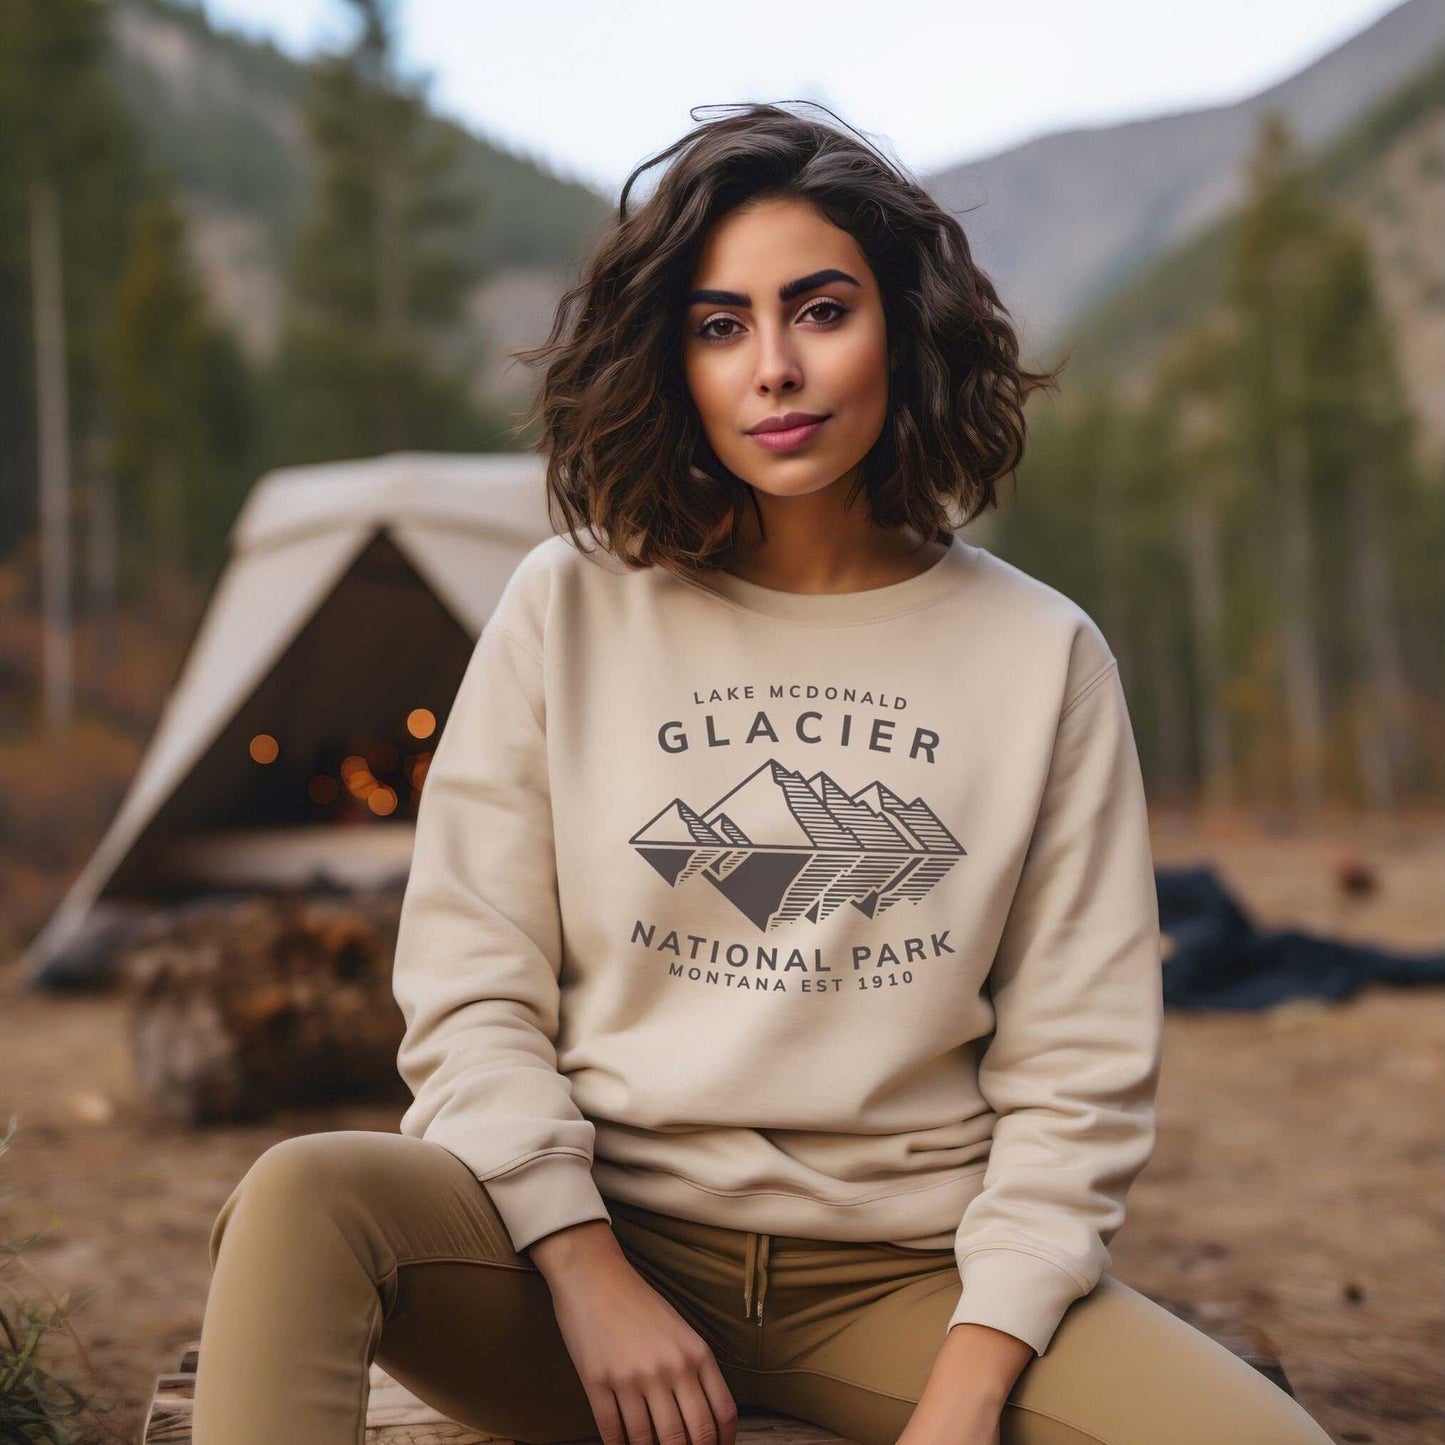 Glacier Lake McDonald National Park SweatshirtBring the beauty of Lake McDonald in Glacier National Park in the Rocky Mountains of Montana into your wardrobe with this ultrasoft and lightweight jersey cotton t-s